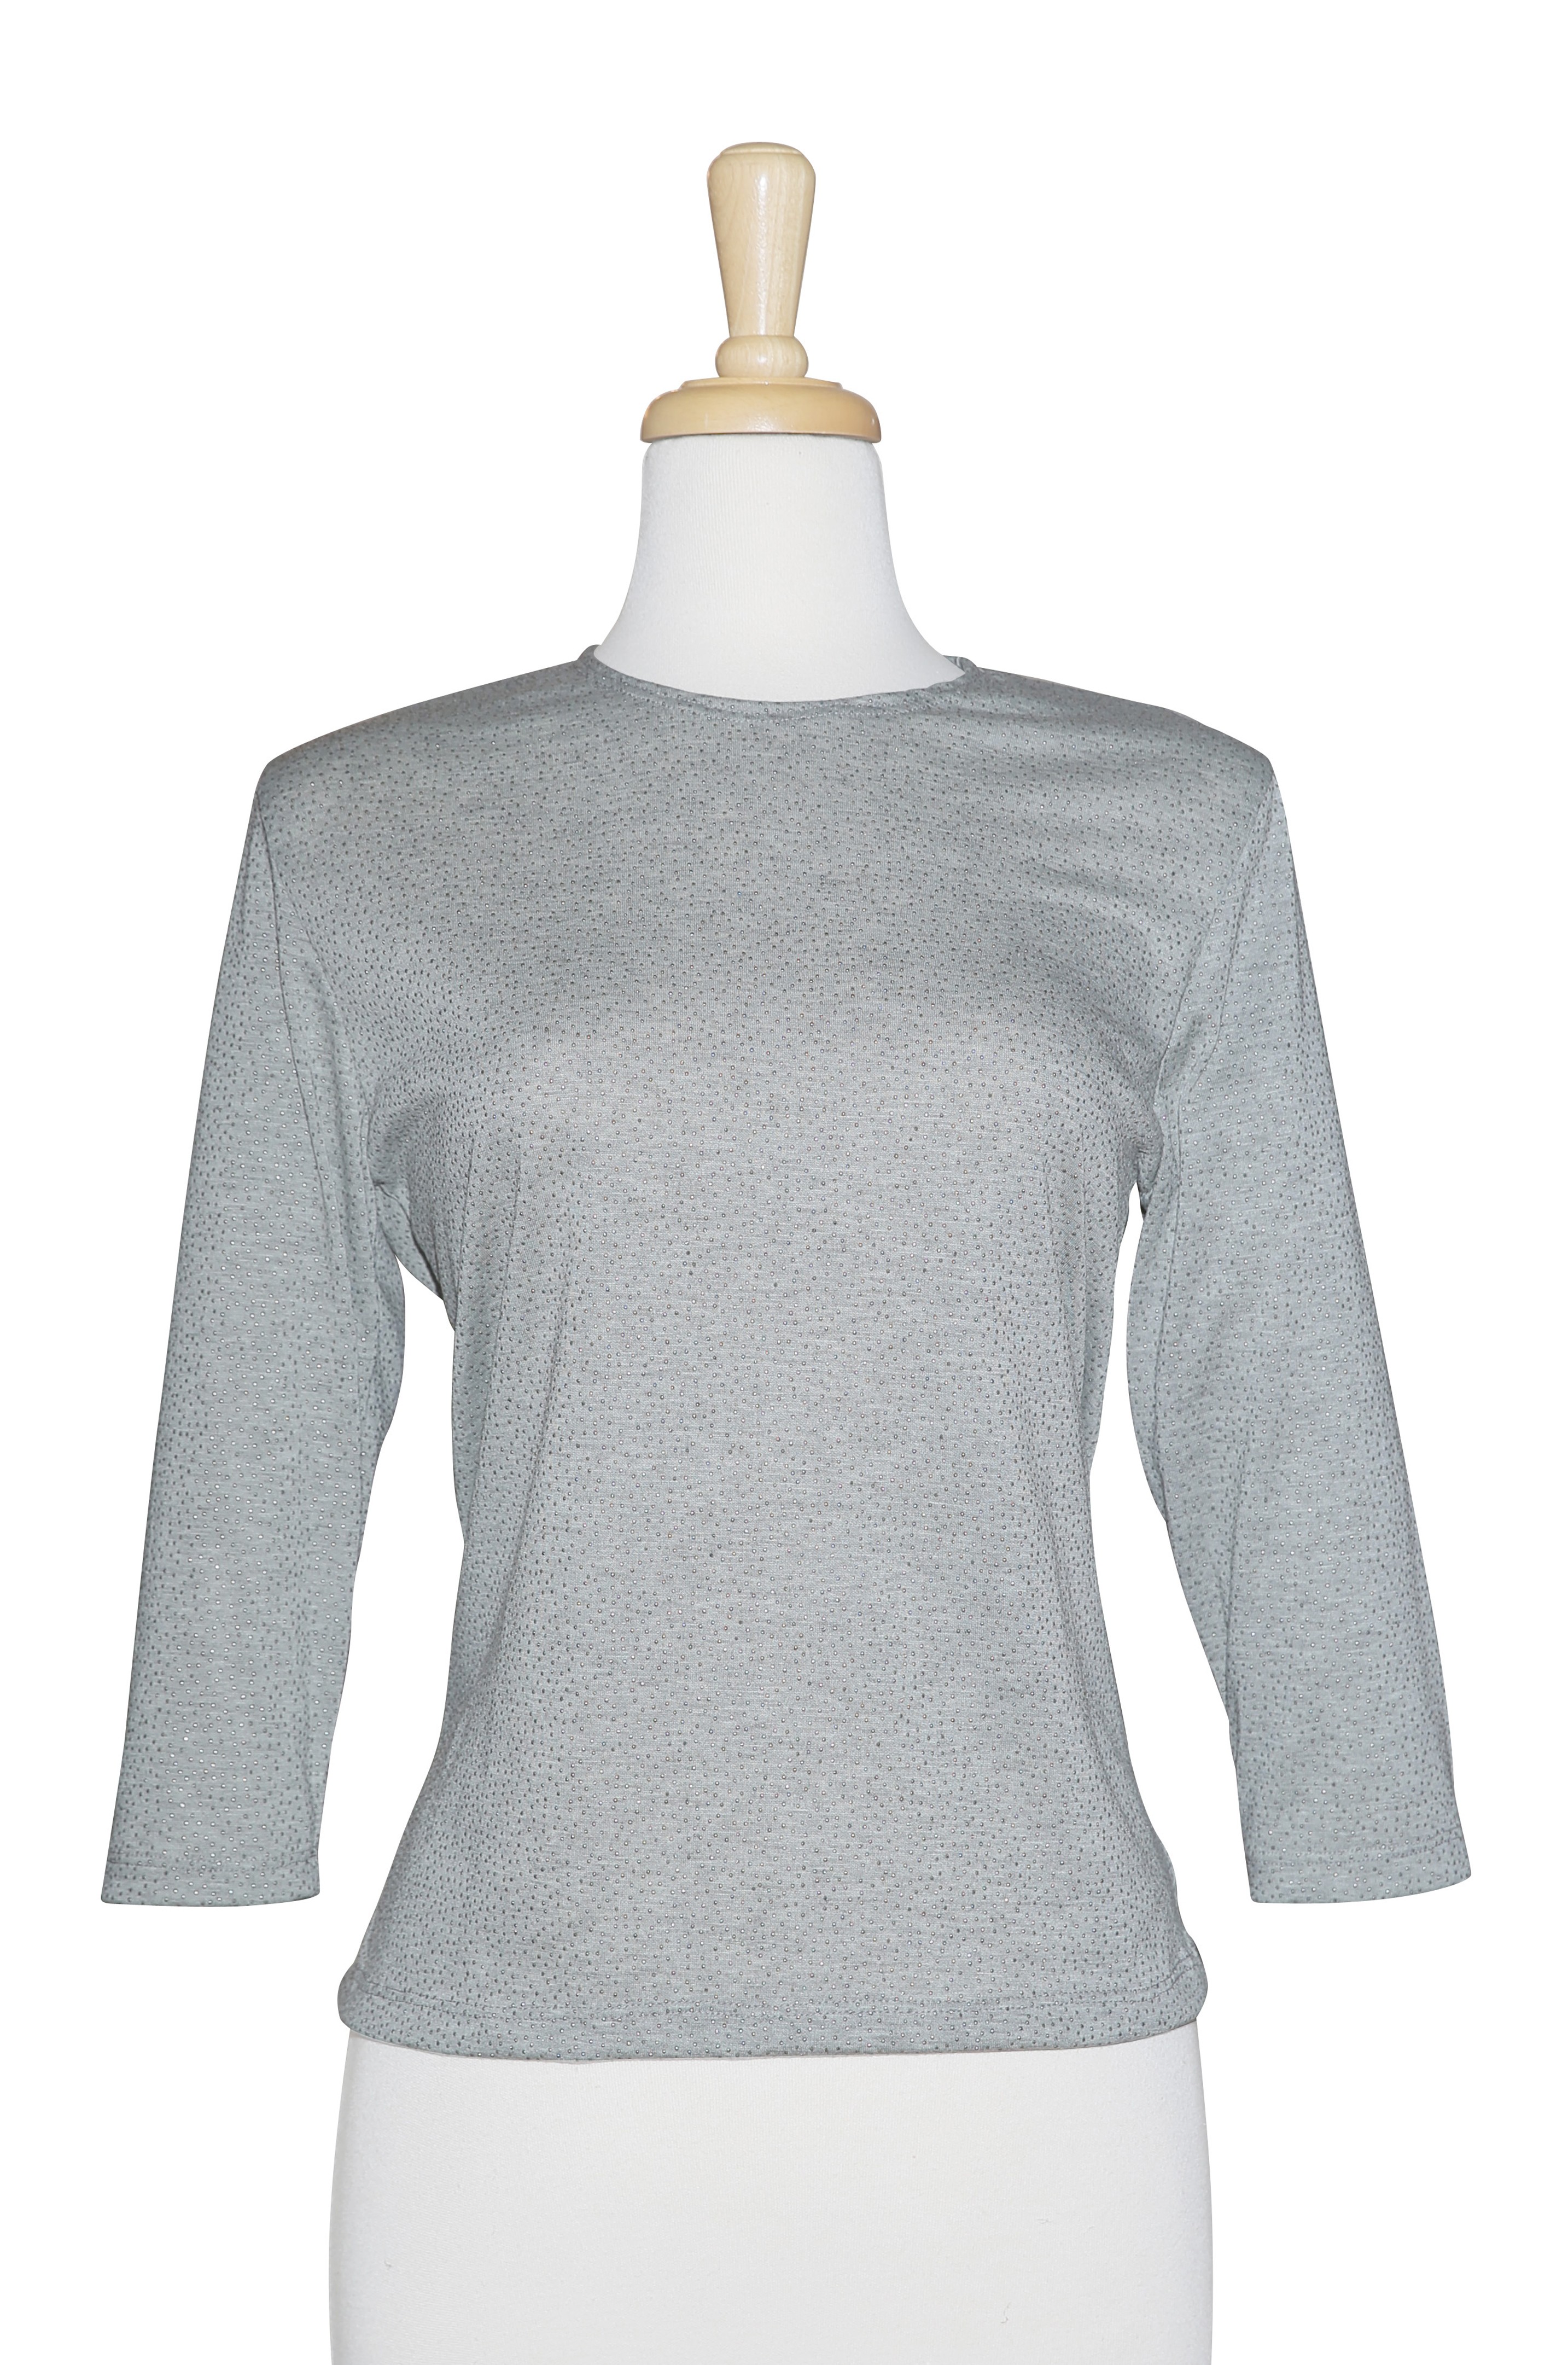 Grey With Silver Pin Dots 3/4 Sleeve Cotton Top 